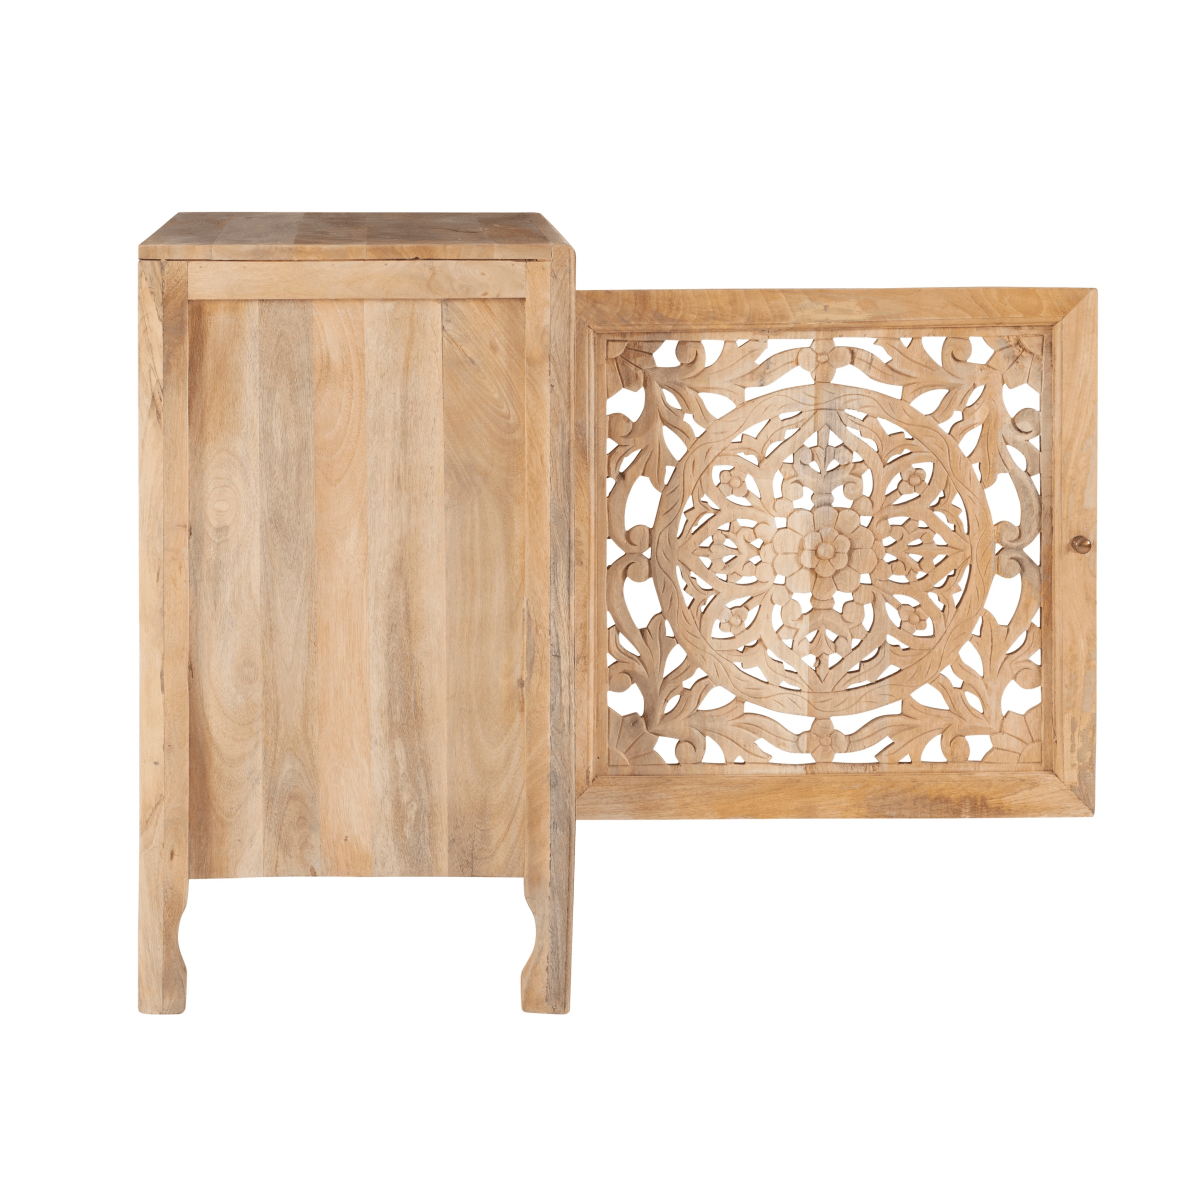 Hand Carved Wooden Cabinet | Handmade Indian Design Cabinetry Furniture Cabinet - Bone Inlay Furnitures